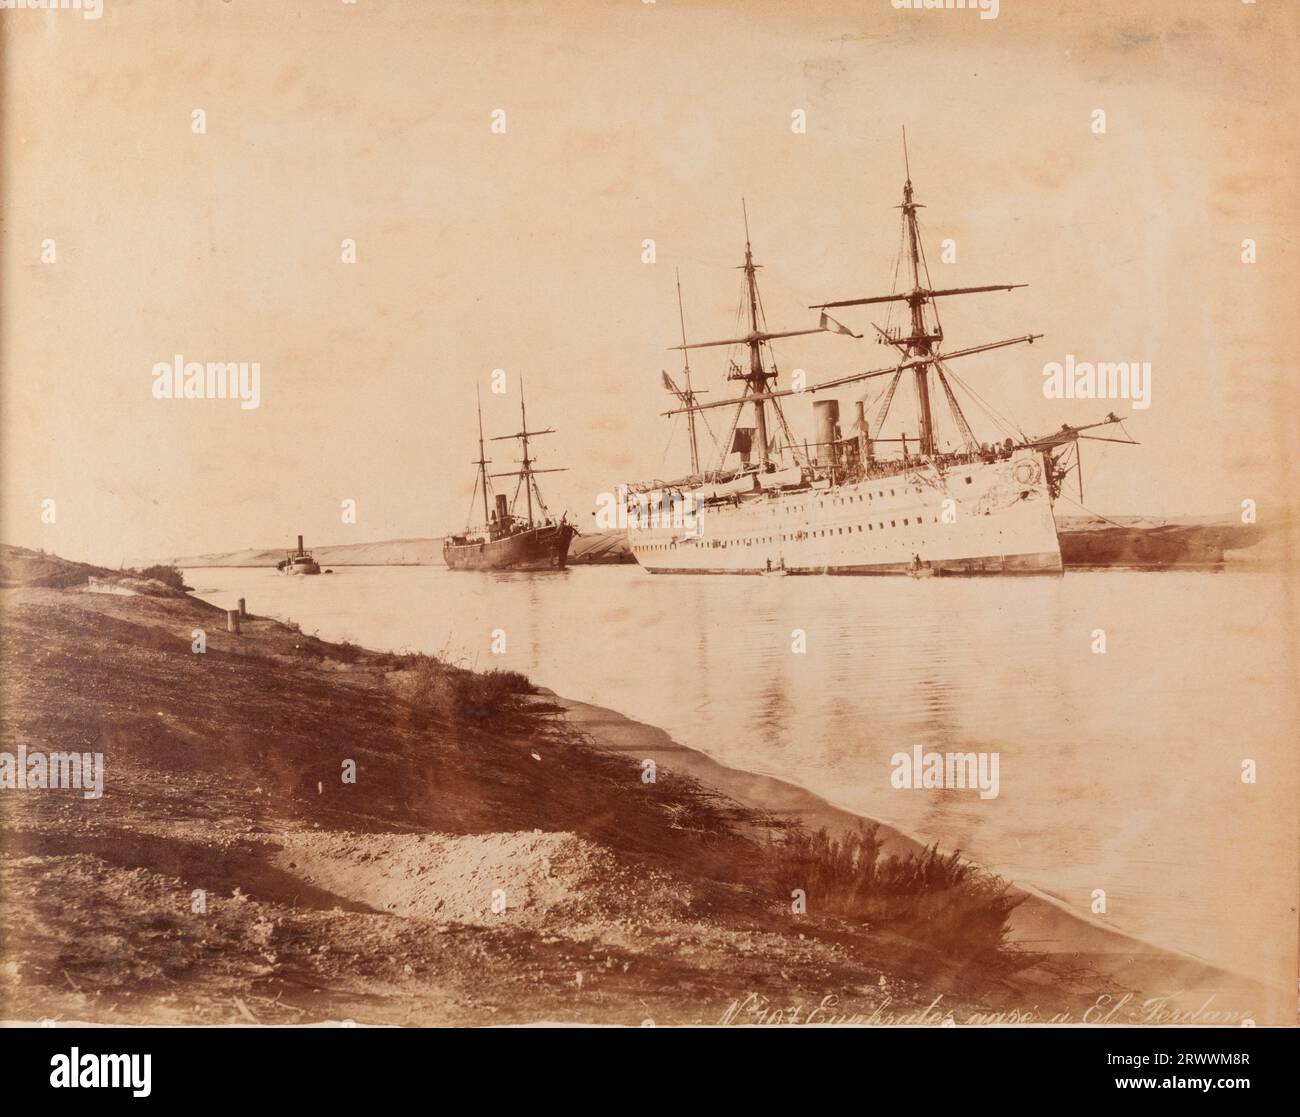 View of a single-funnelled troopship with three masts moored on the Suez canal. There is a smaller ship behind with two masts, and a small ship in the distance. Caption inscribed on negative: No. 107 Euphrates [illegible]. Handwritten caption reads: 1893 Her Majestys Troopship Euphrates in Suez Canal. Stock Photo